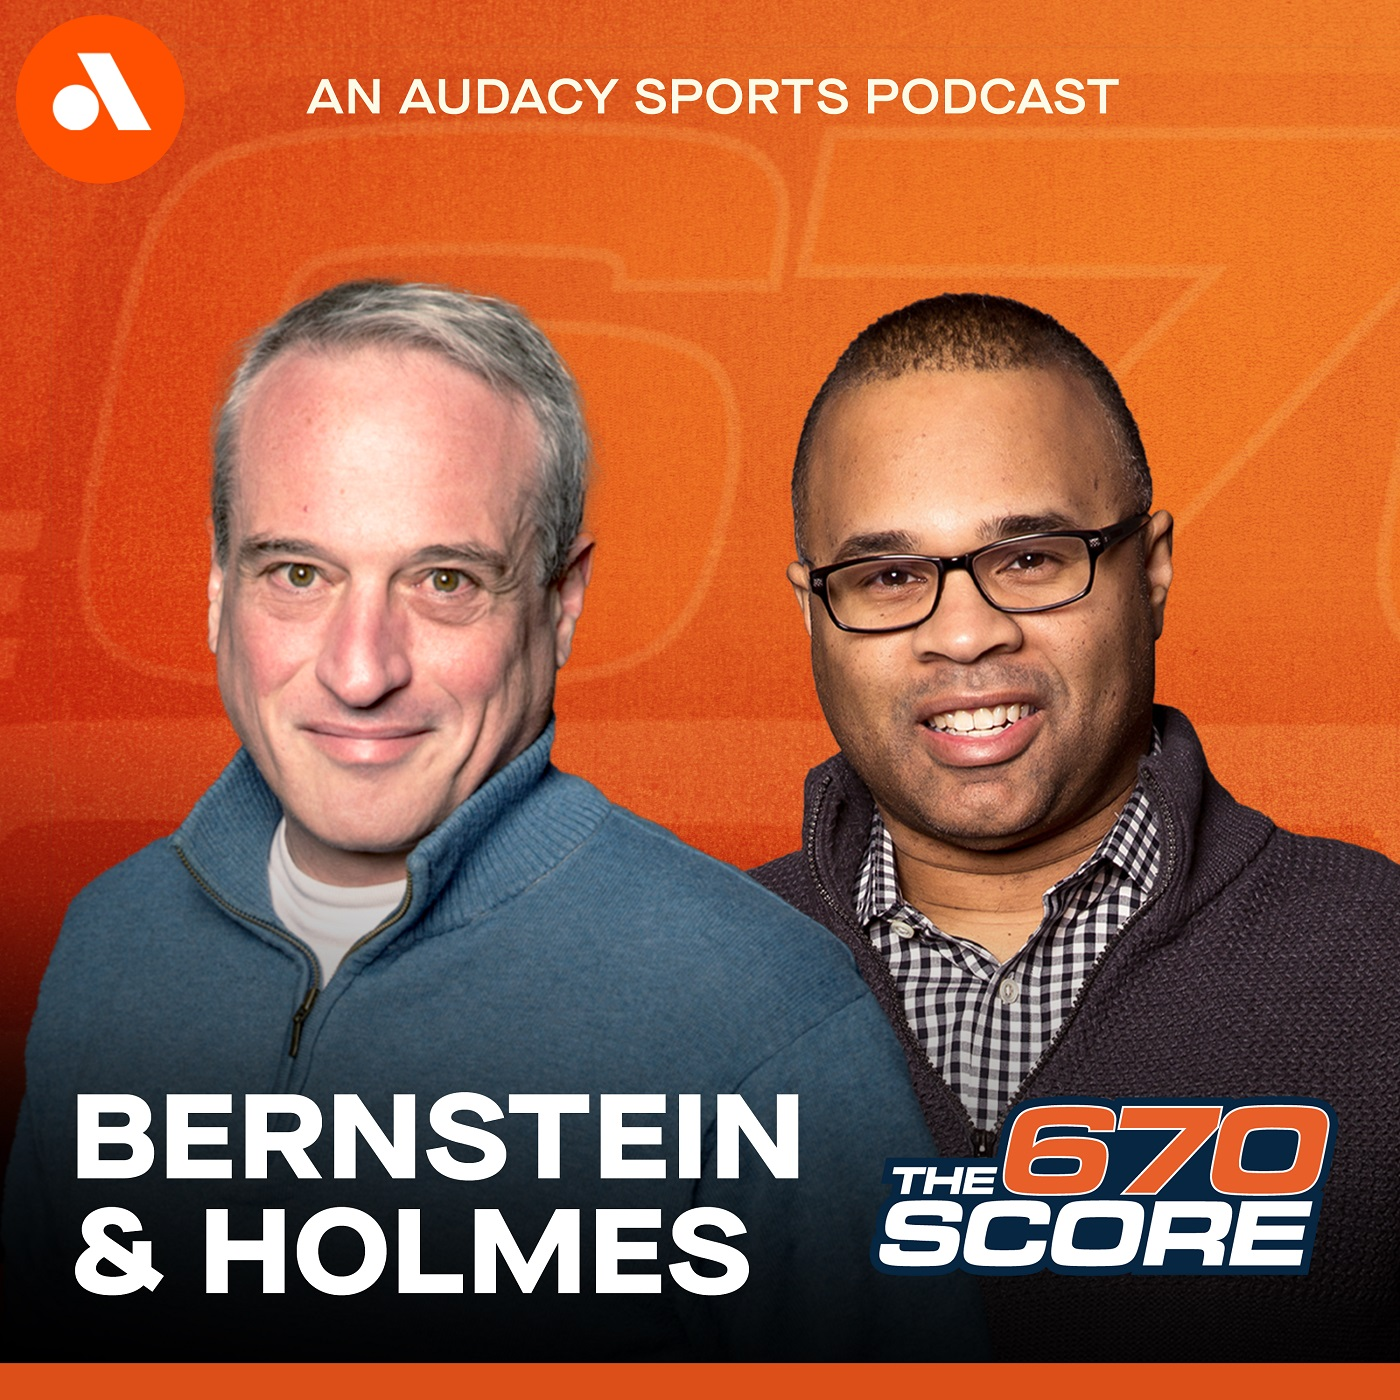 Adam Hoge on Bears' searches, can Bulls bounce back? (Hour 2)